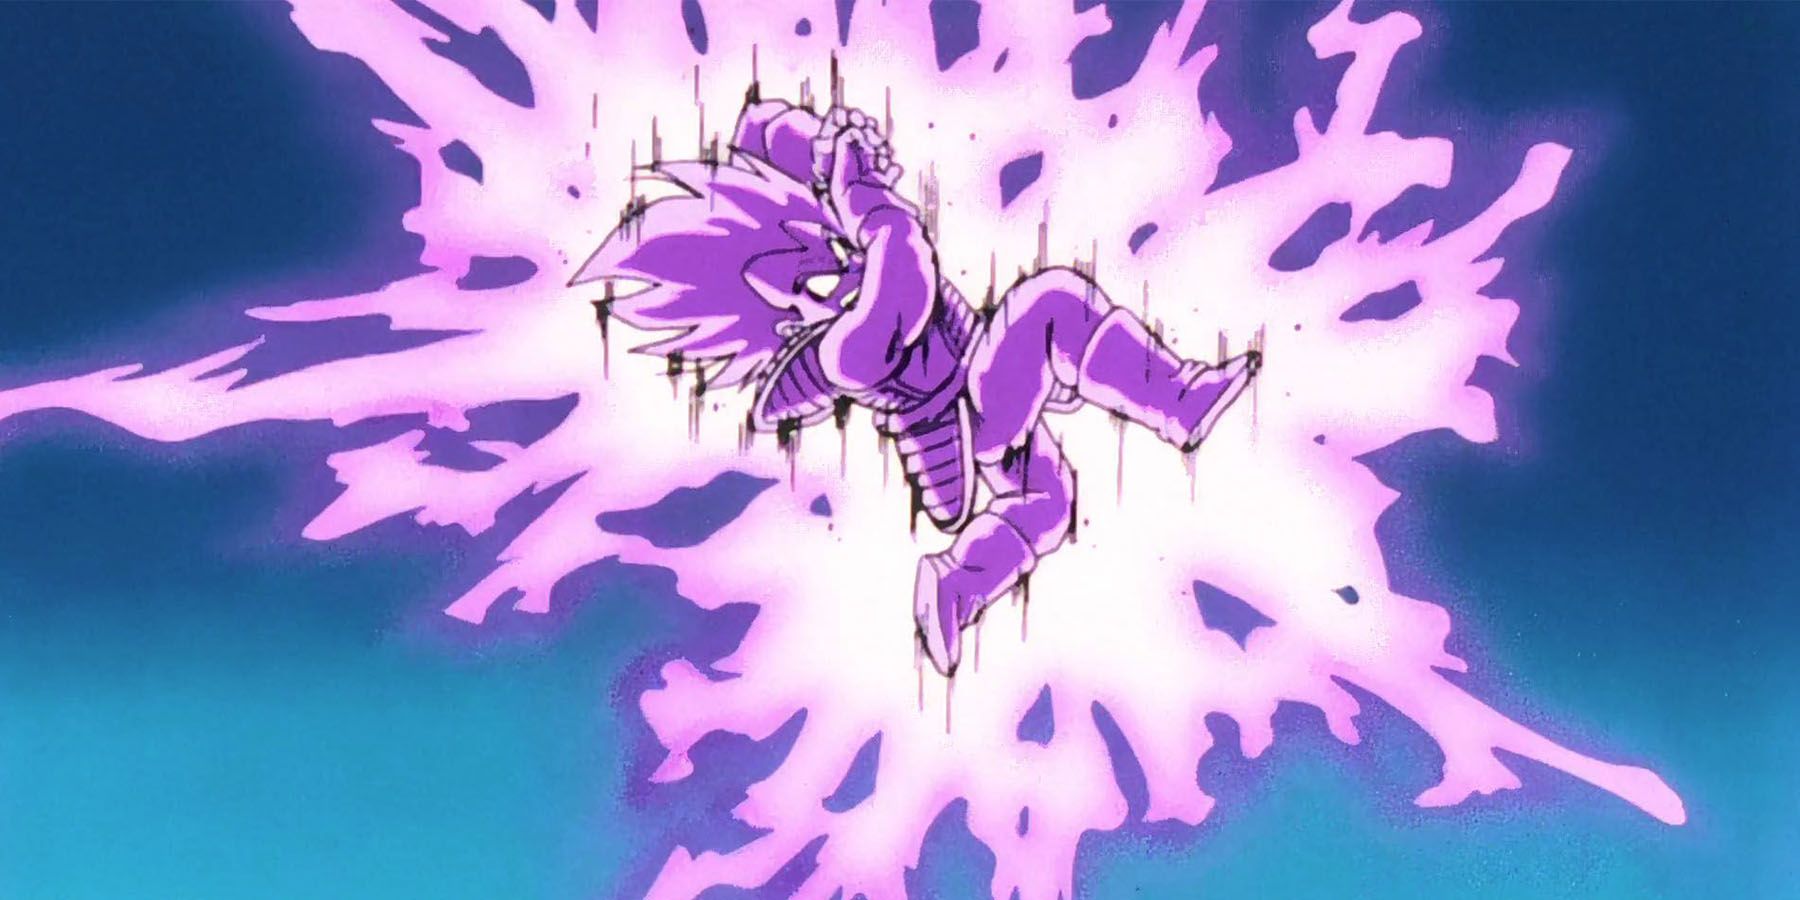 Vegeta collects energy for a massive Galick Gun attack in Dragon Ball Z.